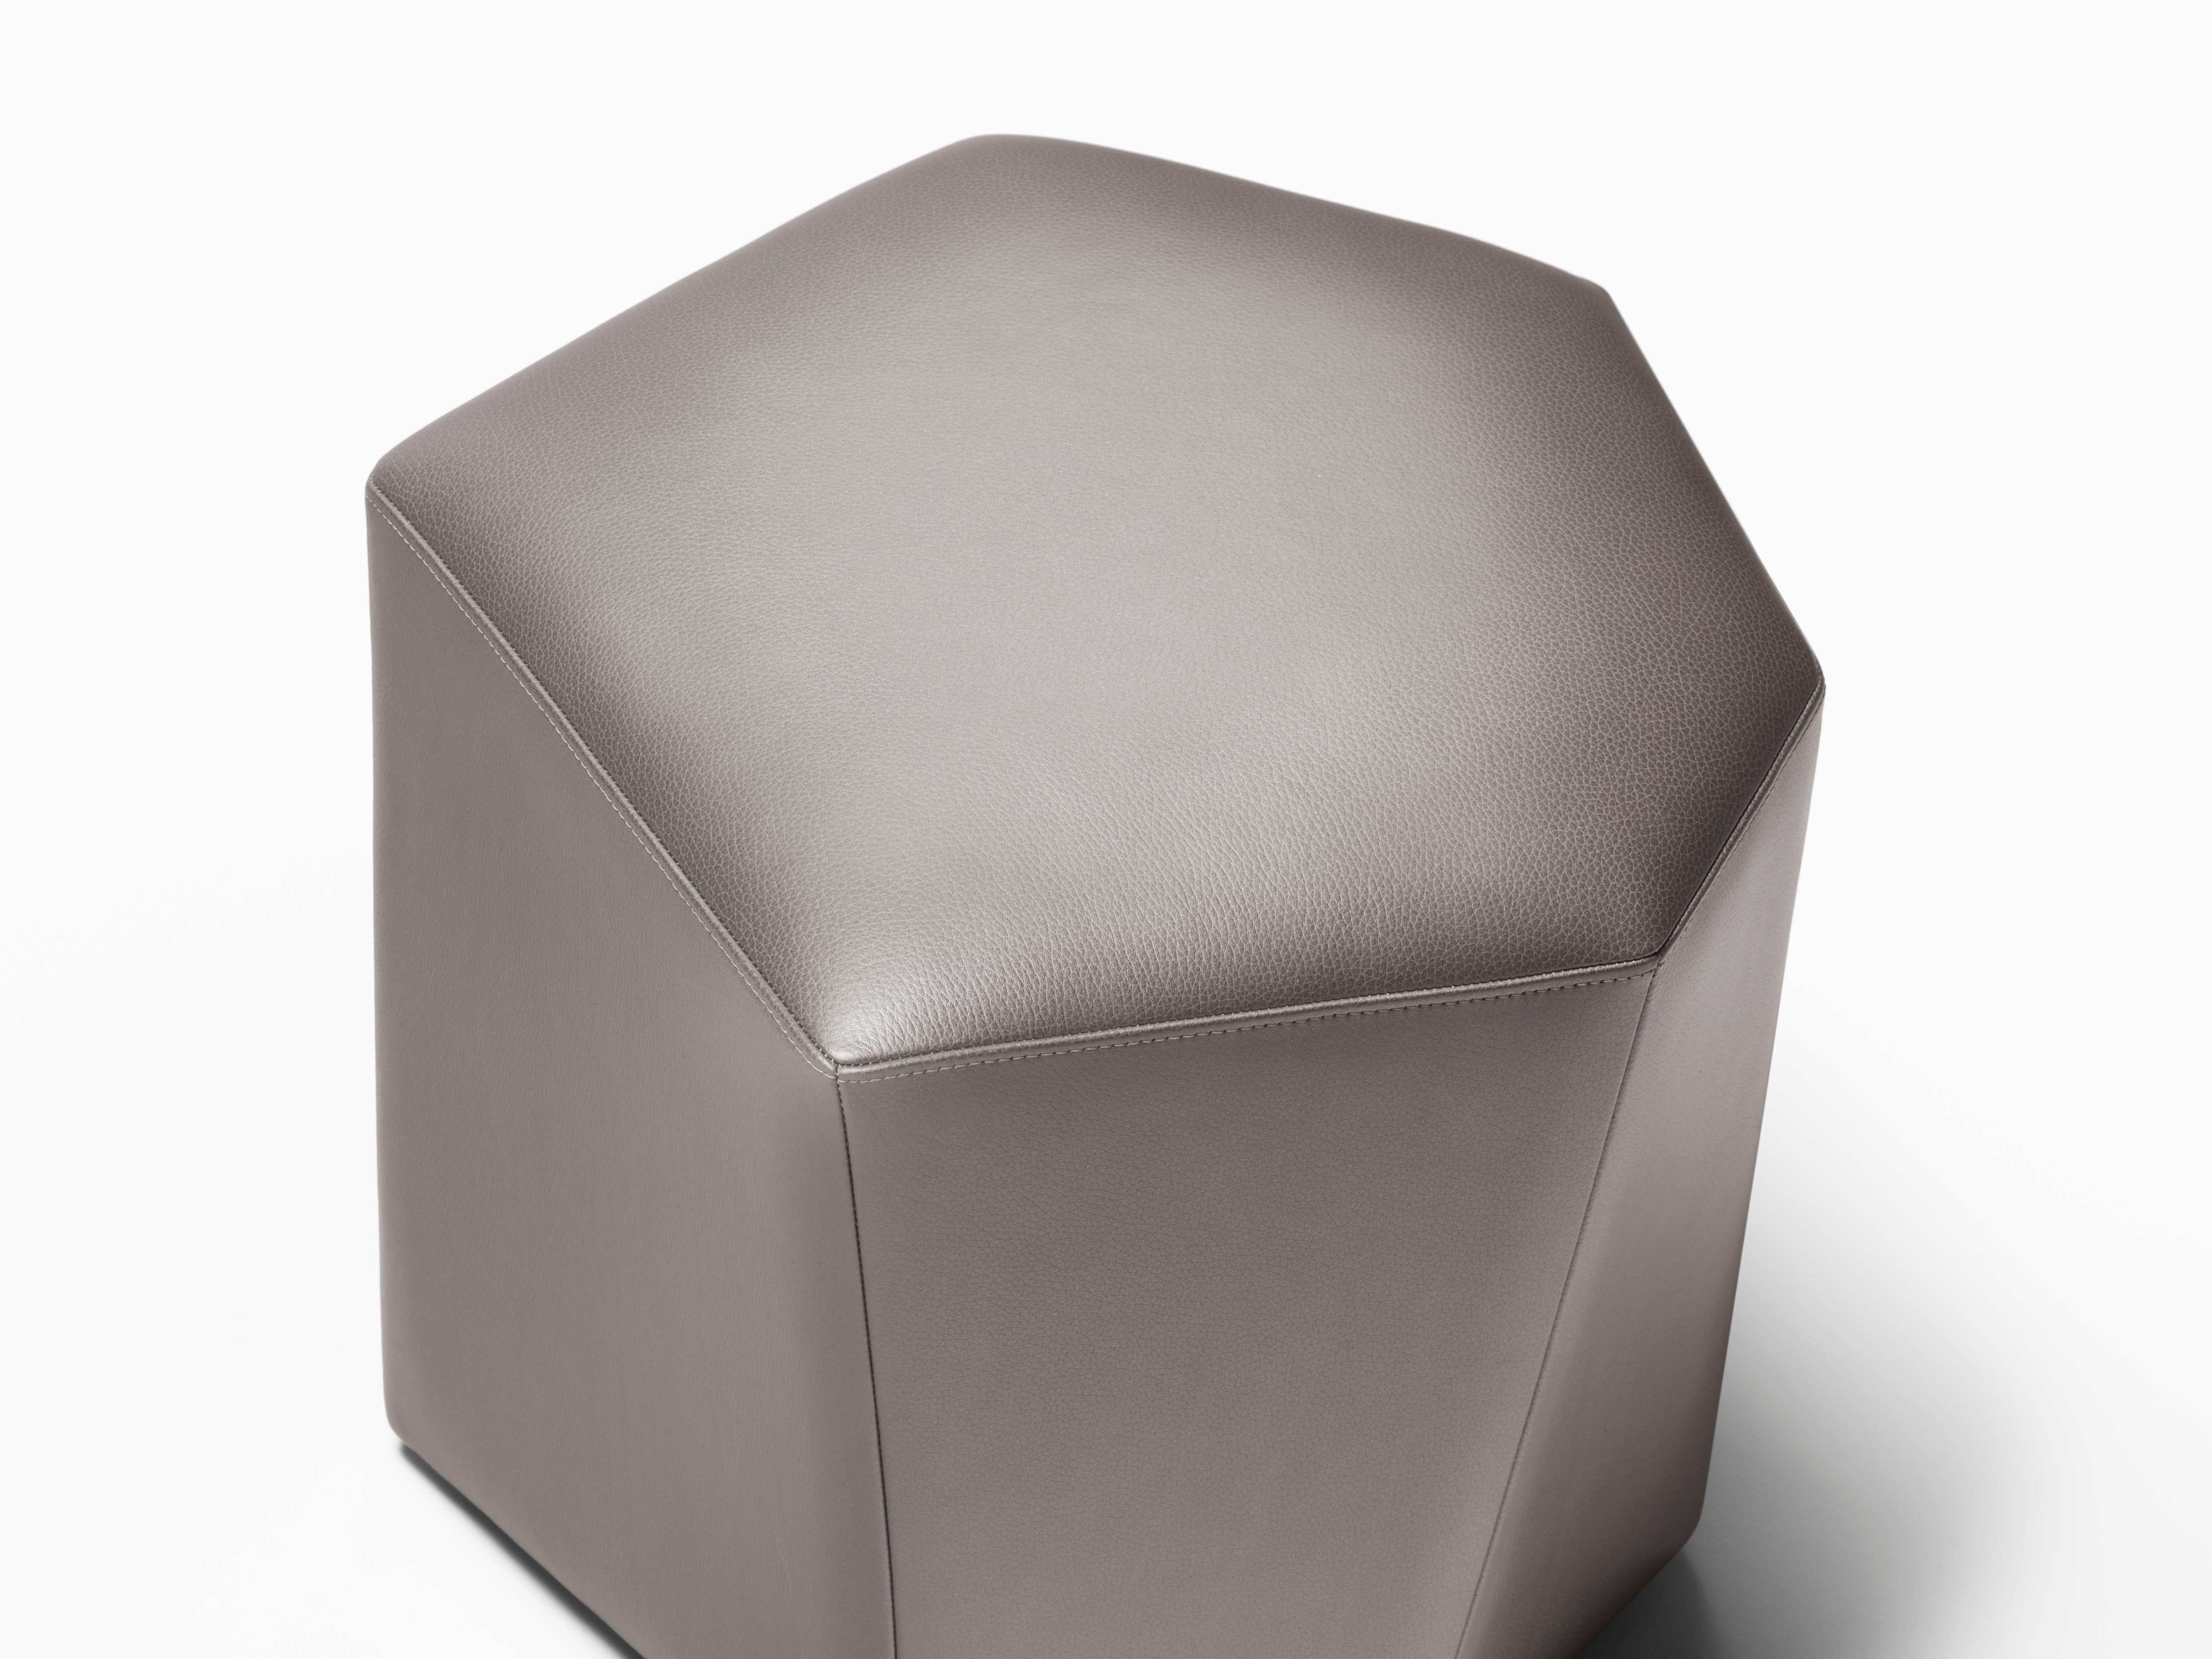 HOLLY HUNT Vrille ottoman in argento leather. A wonderful geometric ottoman highlighting precise stitching details that will add interest, or additional seating, to any living space.


Additional Information:
Leather: 6014/04 Chiberia Iced: